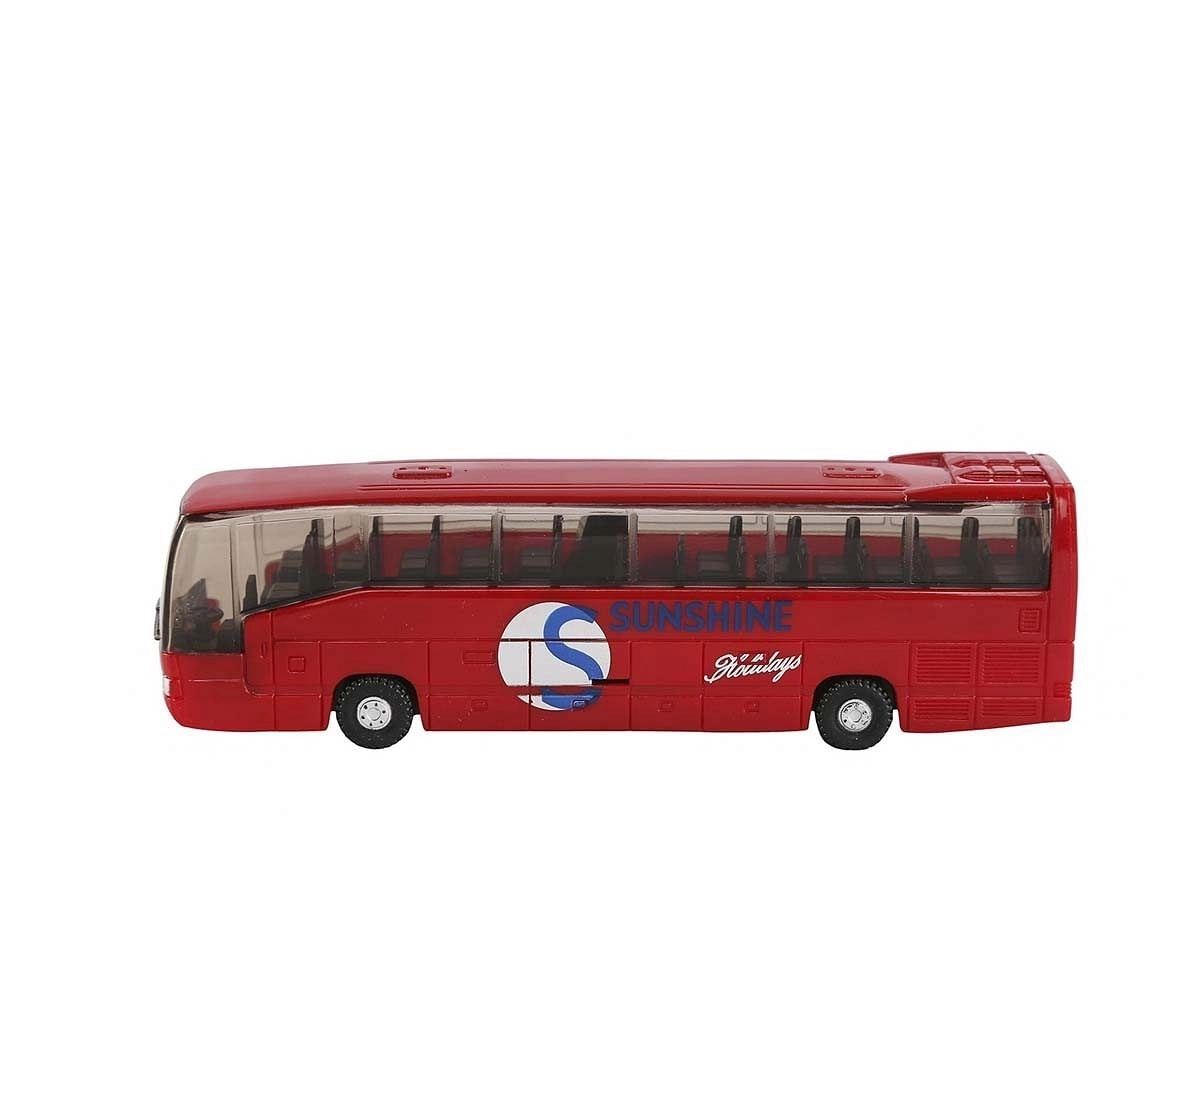 John World Sunshine Red Tour Bus (Color May Vary) Vehicles for Kids age 3Y+